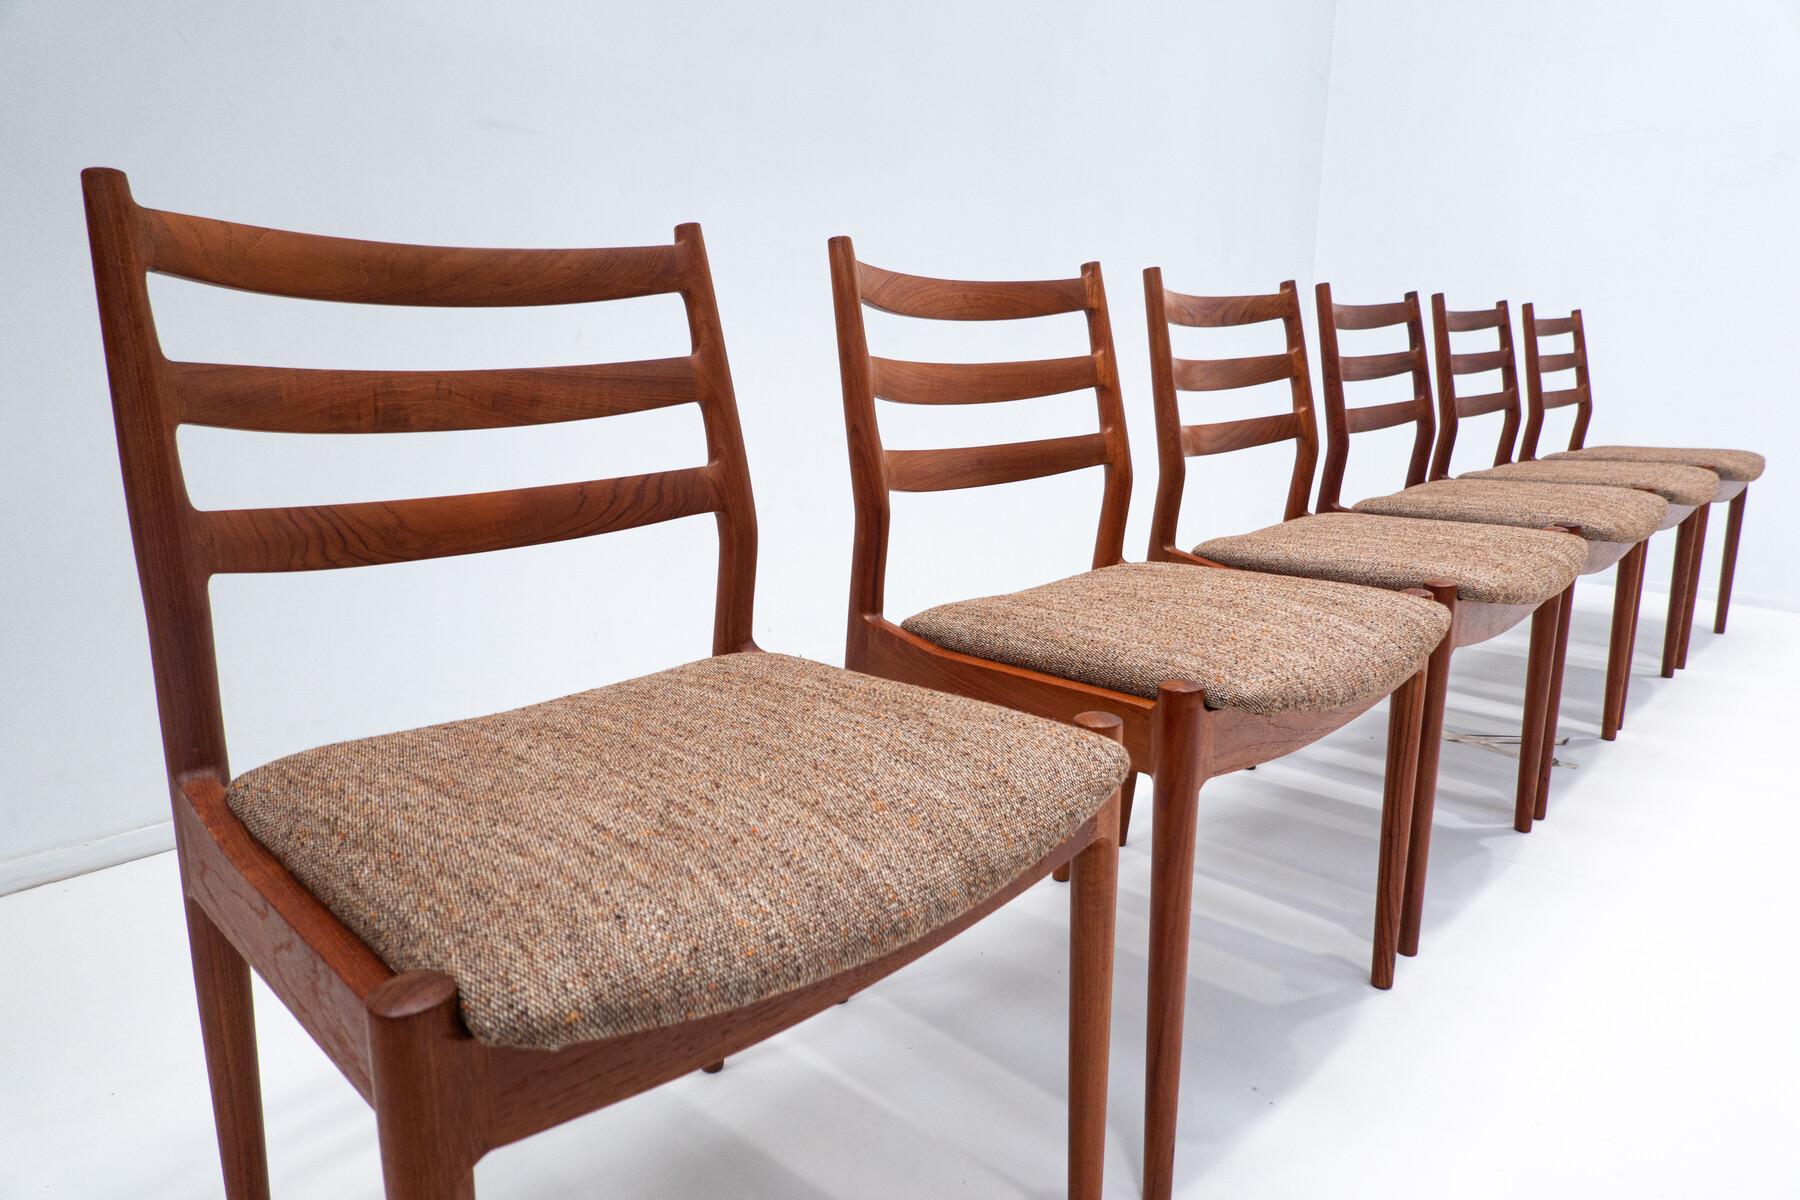 Mid-20th Century Set of 6 Mid-Century Scandinavian Wooden Chairs, 1960s For Sale